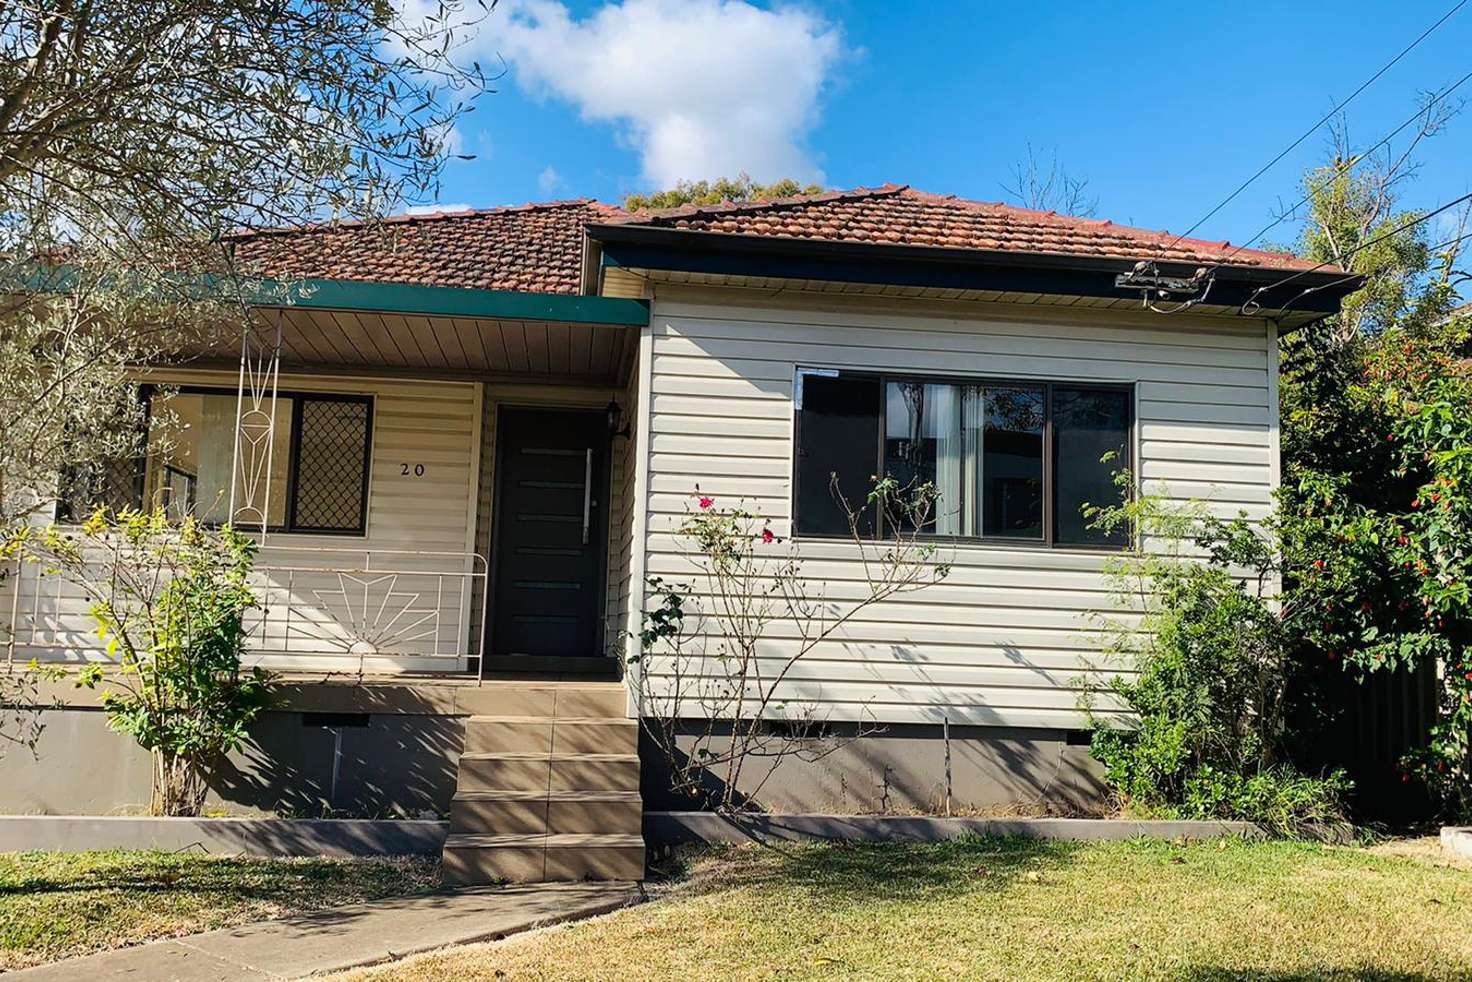 Main view of Homely house listing, 20 Lytton Street, Wentworthville NSW 2145